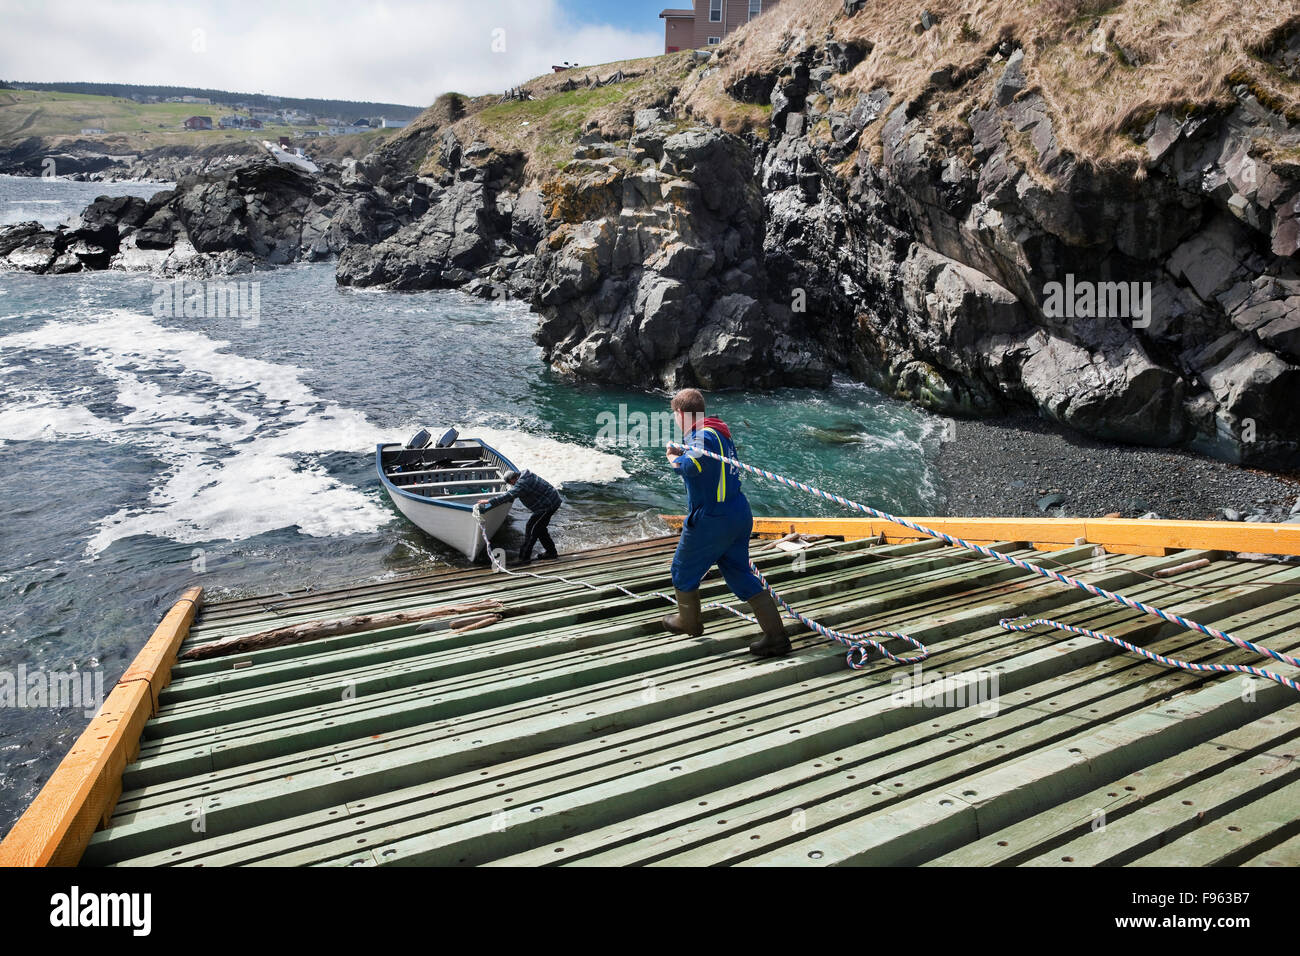 Two fishermen on a slipway (boat ramp) preparing their dory for an outing, Pouch cove, Newfoundland, Canada Stock Photo